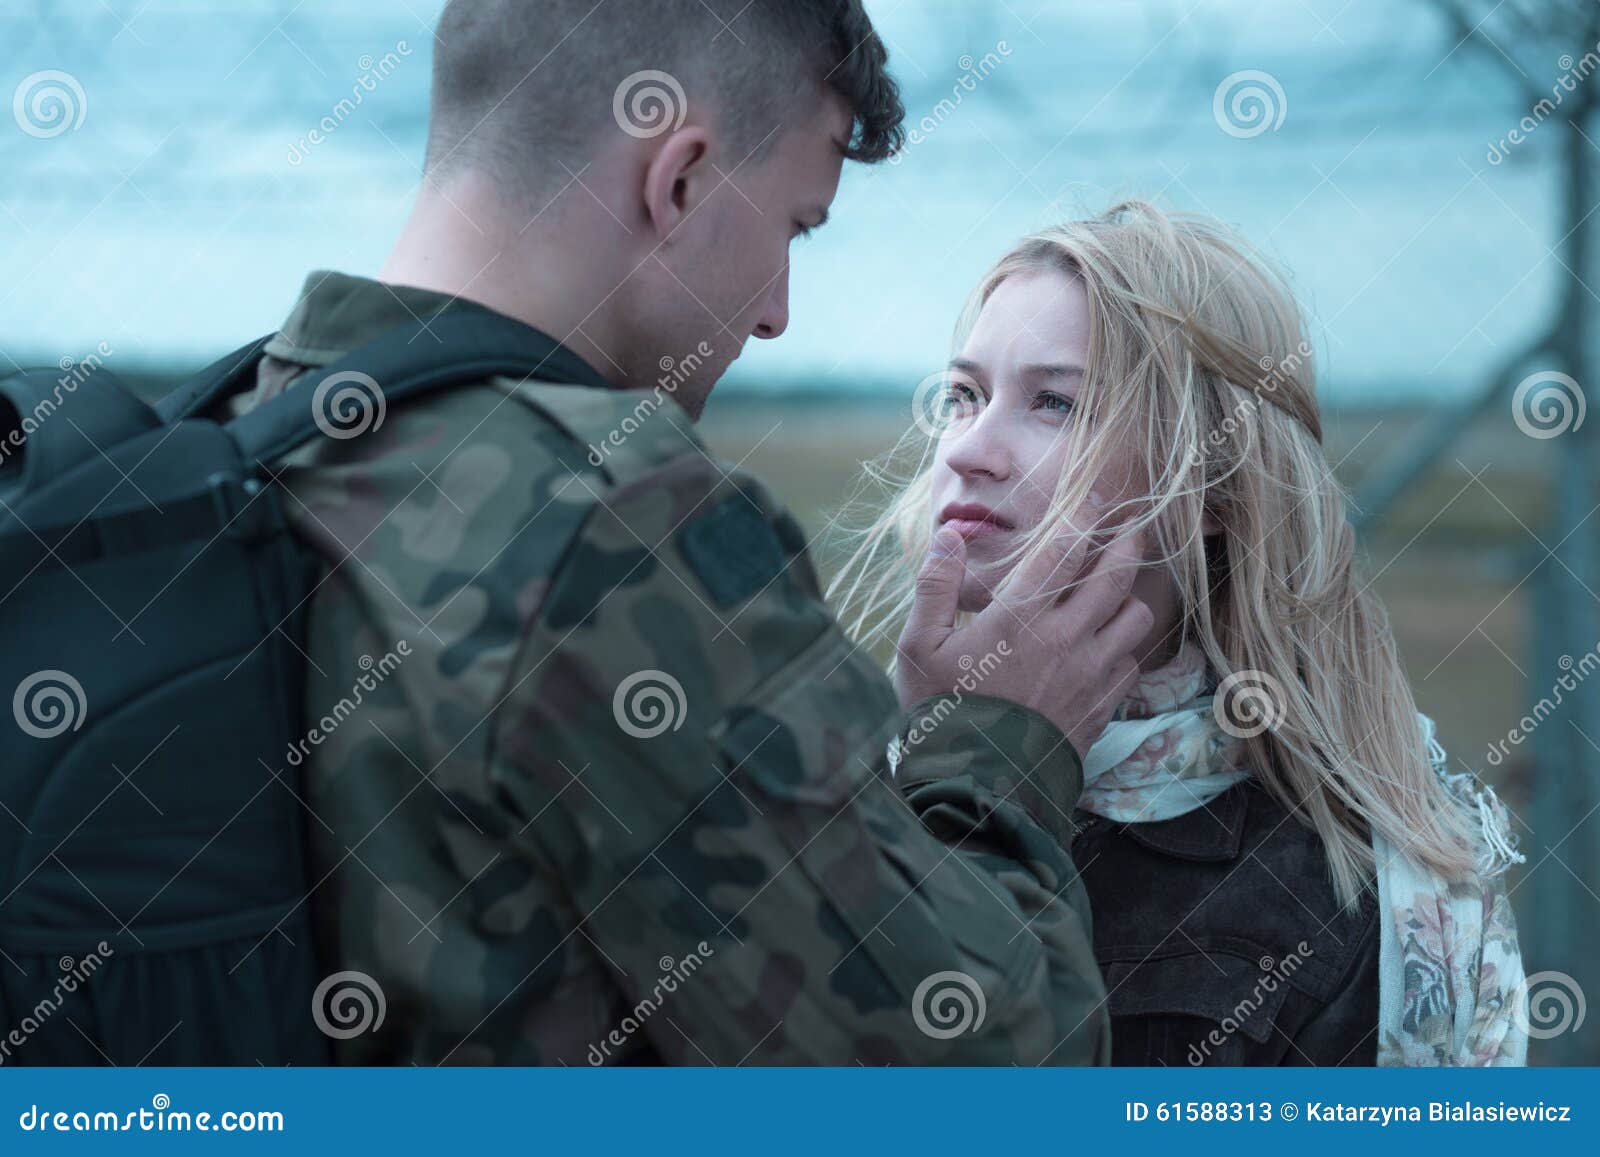 Young soldier farewell stock image. Image of enlist, goodbye ...